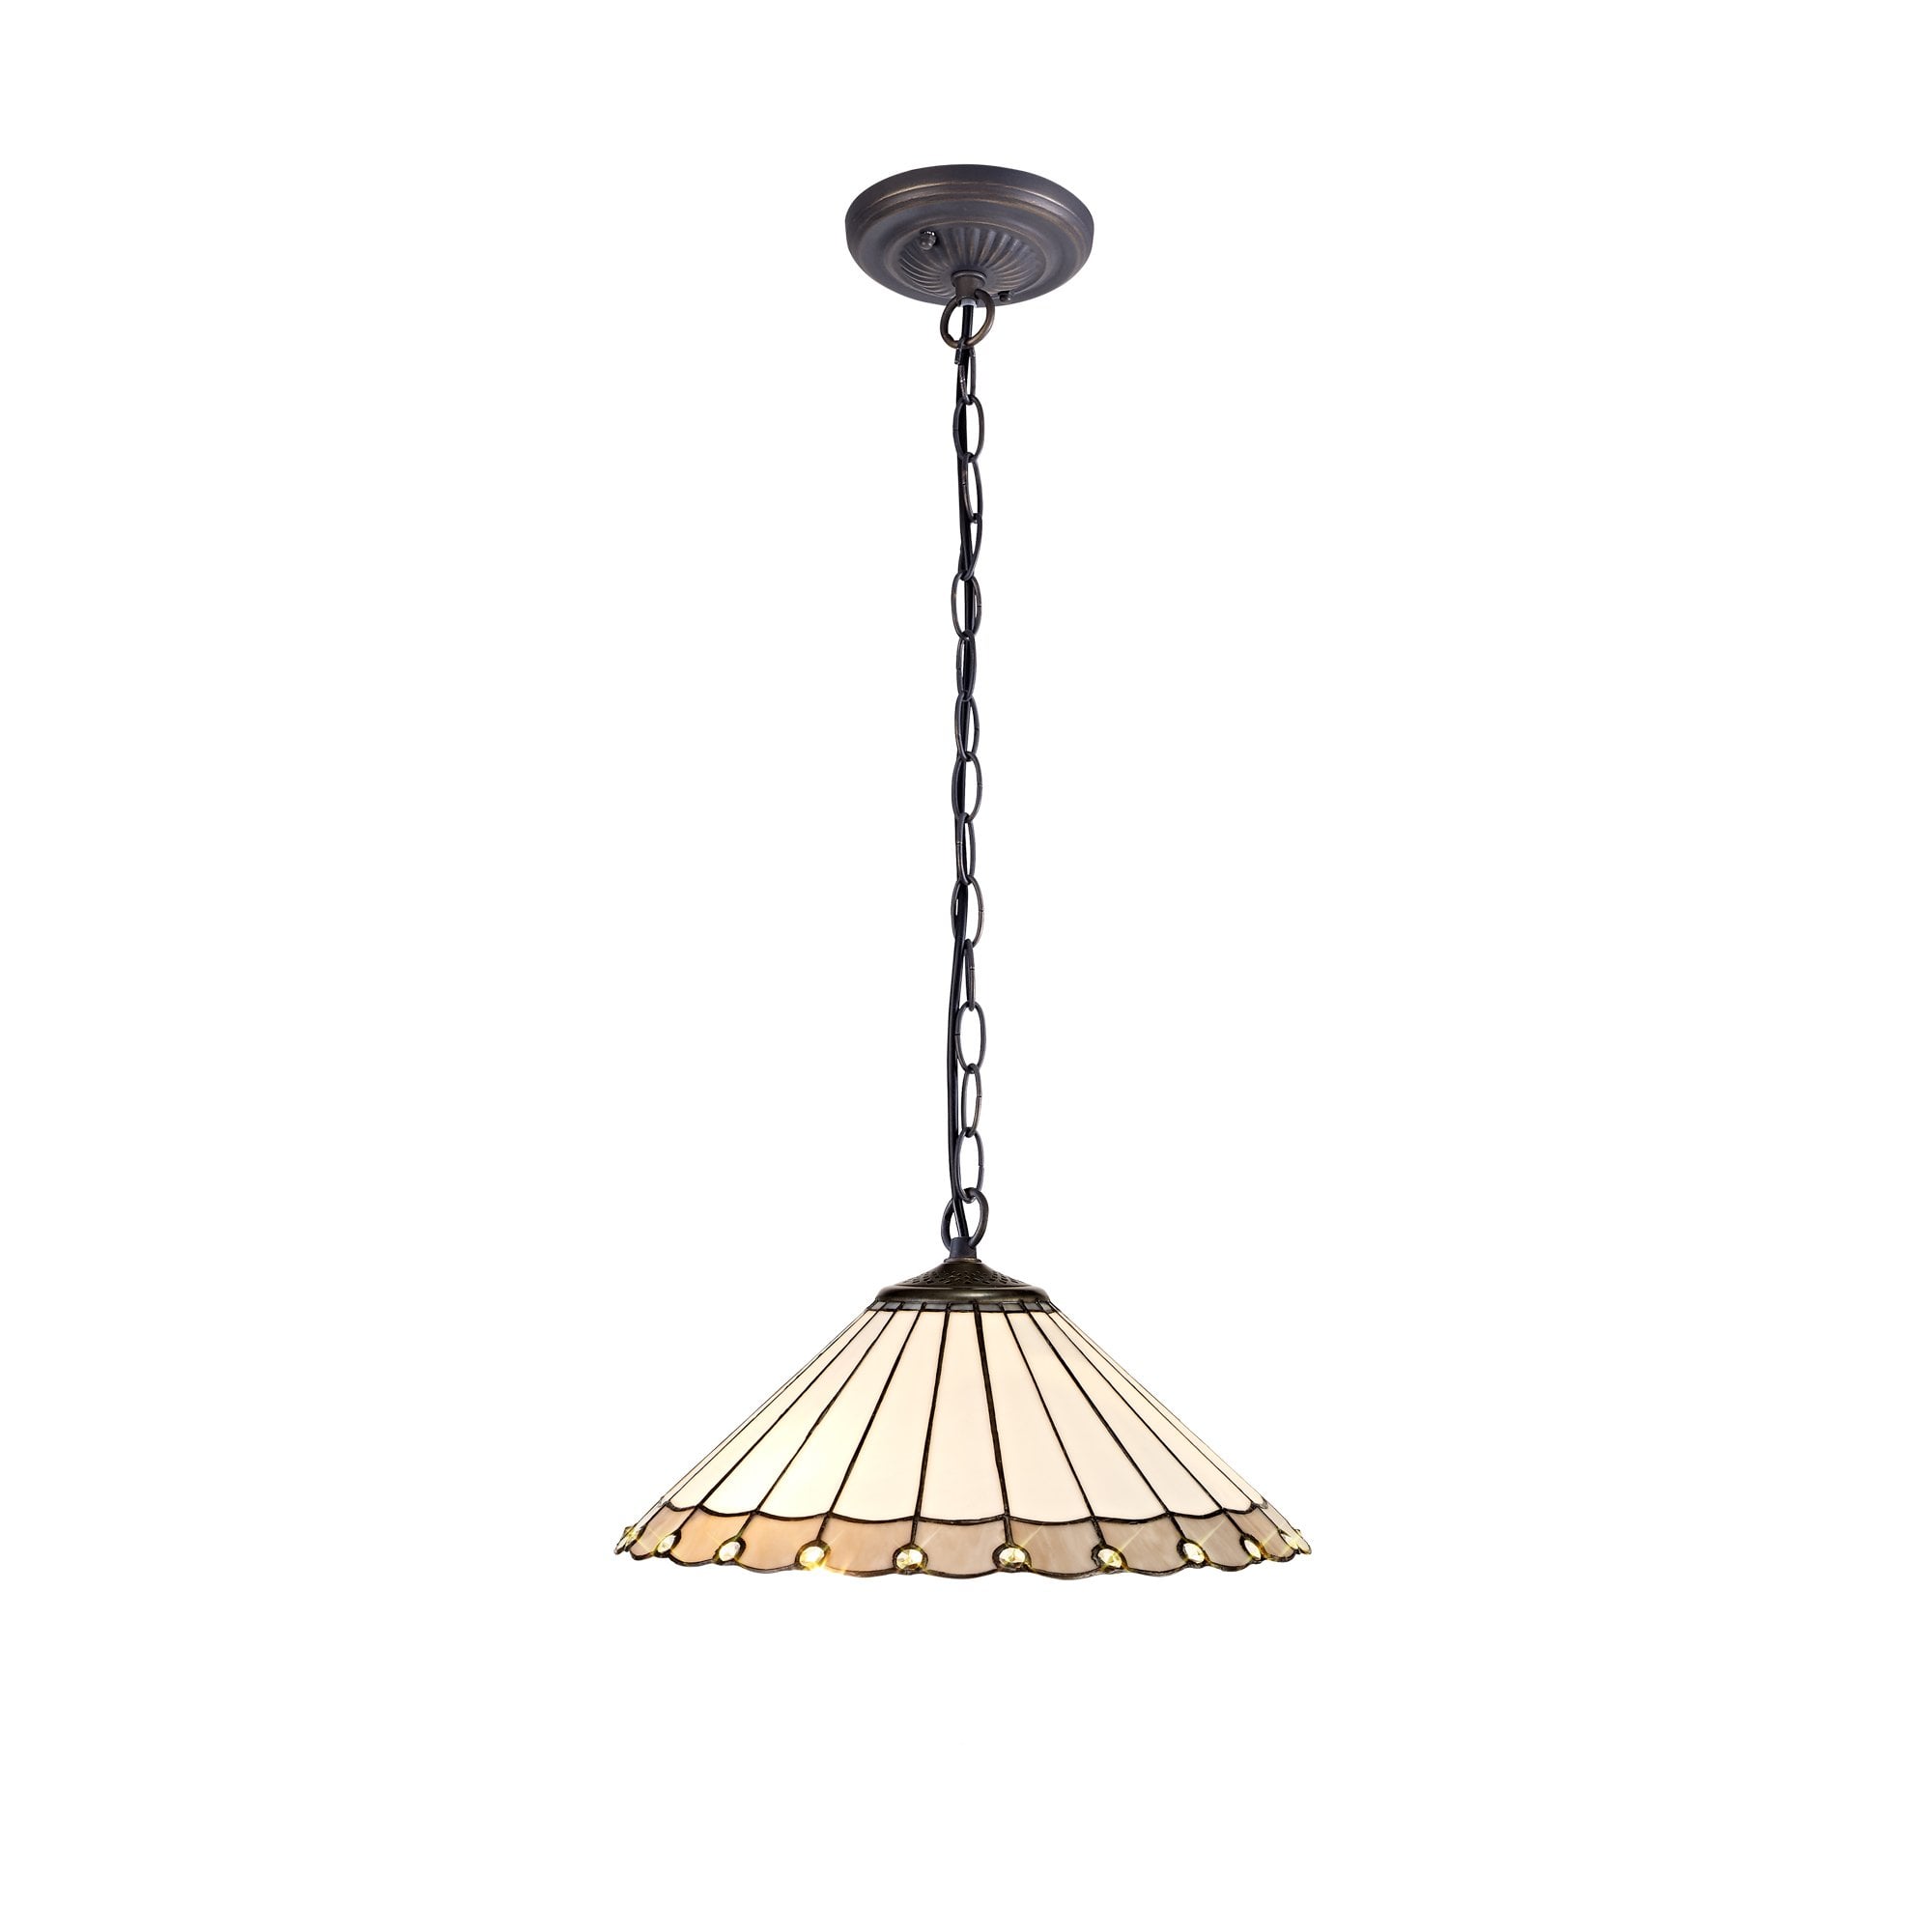 1 Light Downlighter Pendant E27 With 40cm Tiffany Shade, Grey/Cream/Crystal/Aged Antique Brass